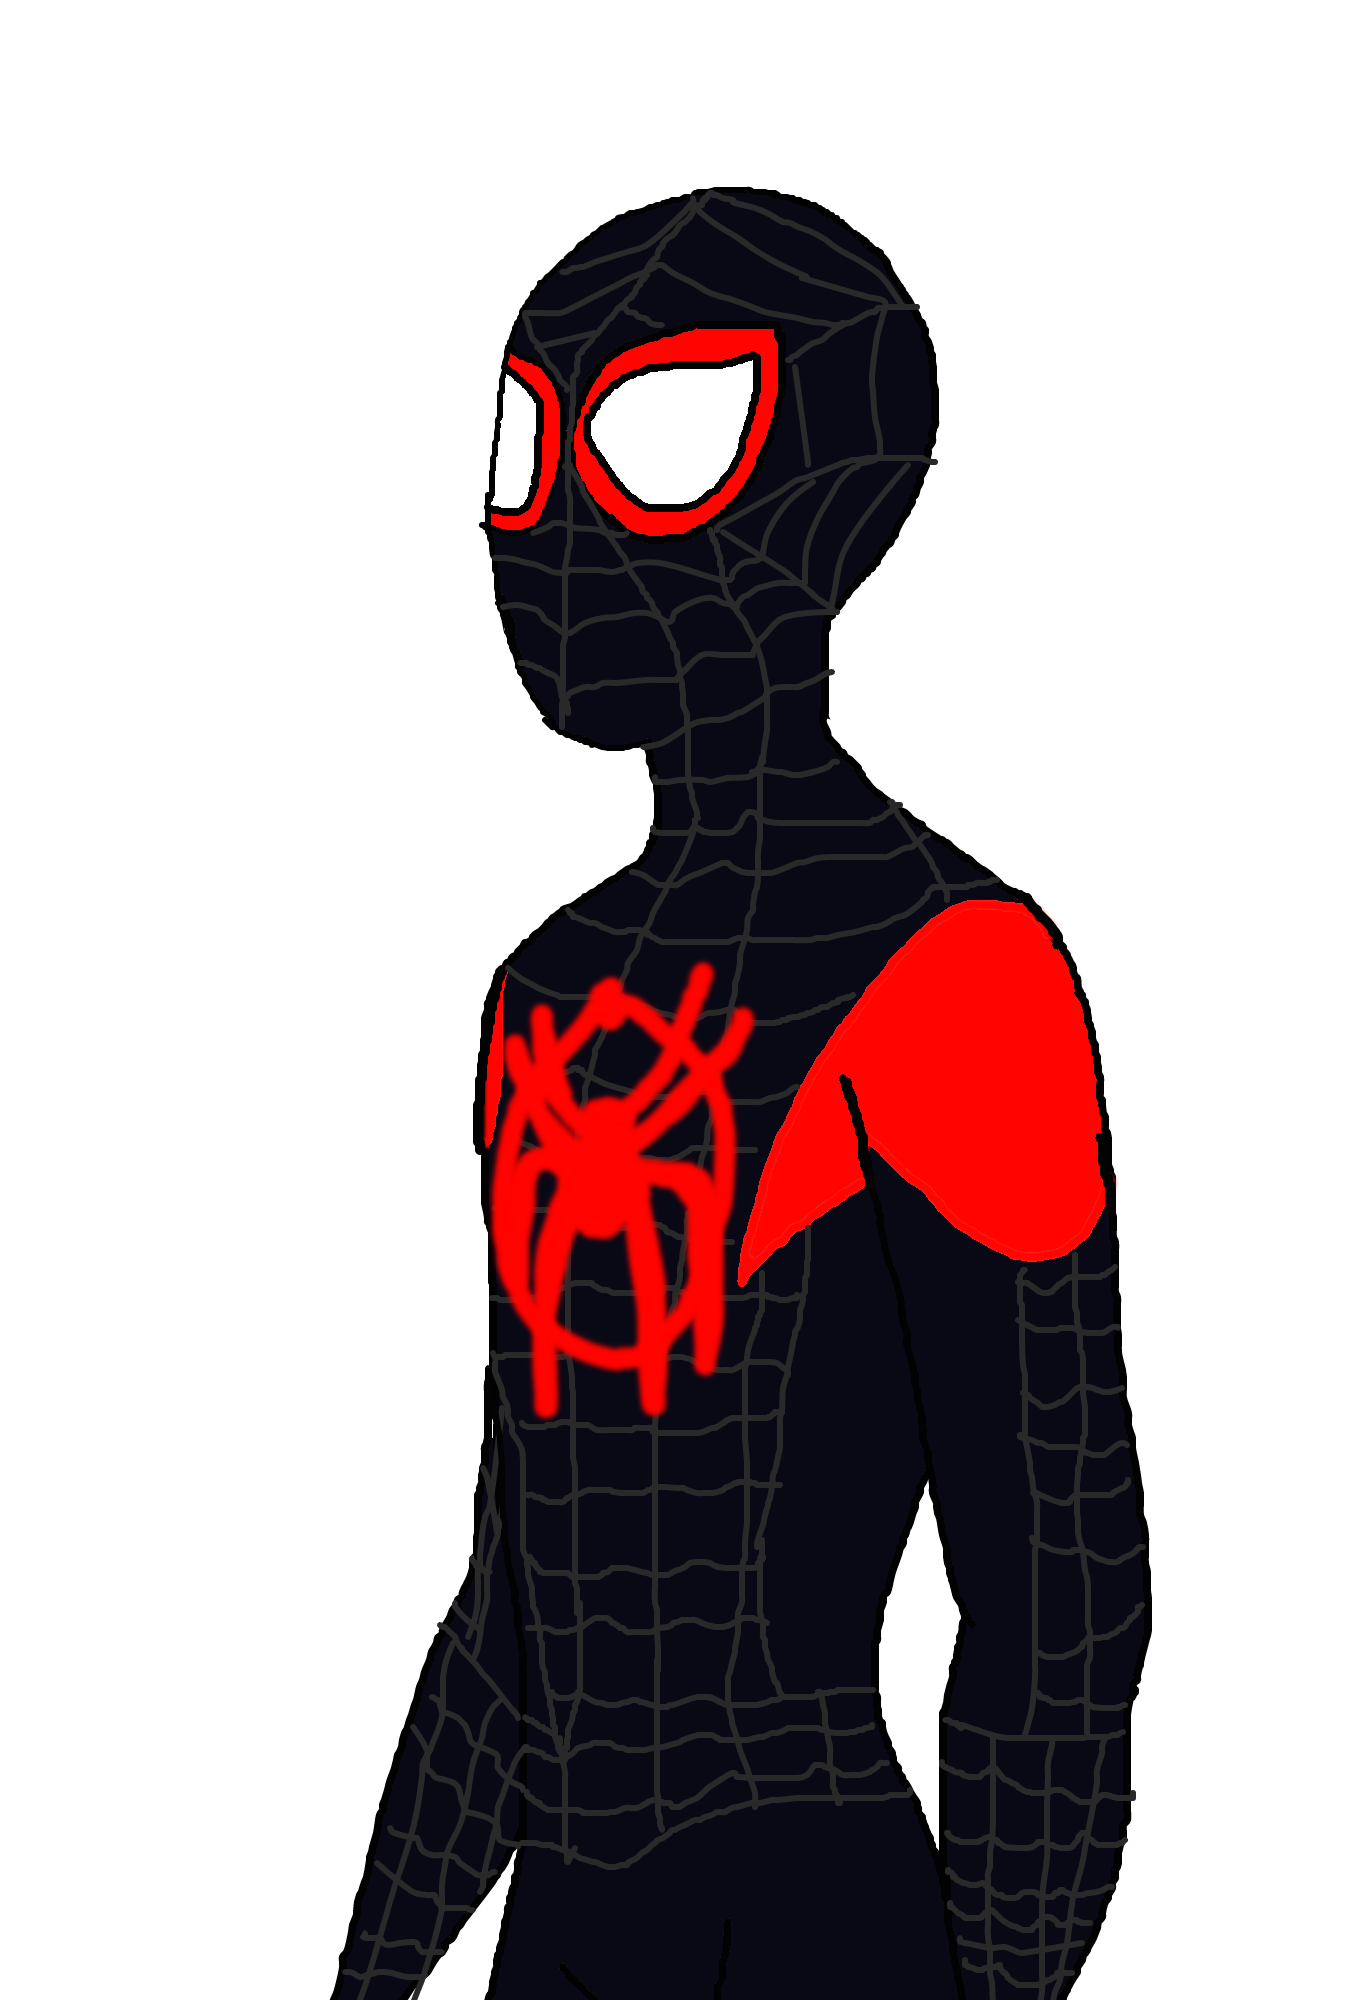 Spider Man Miles Morales Into The Spider Verse By Alvaxerox On Deviantart